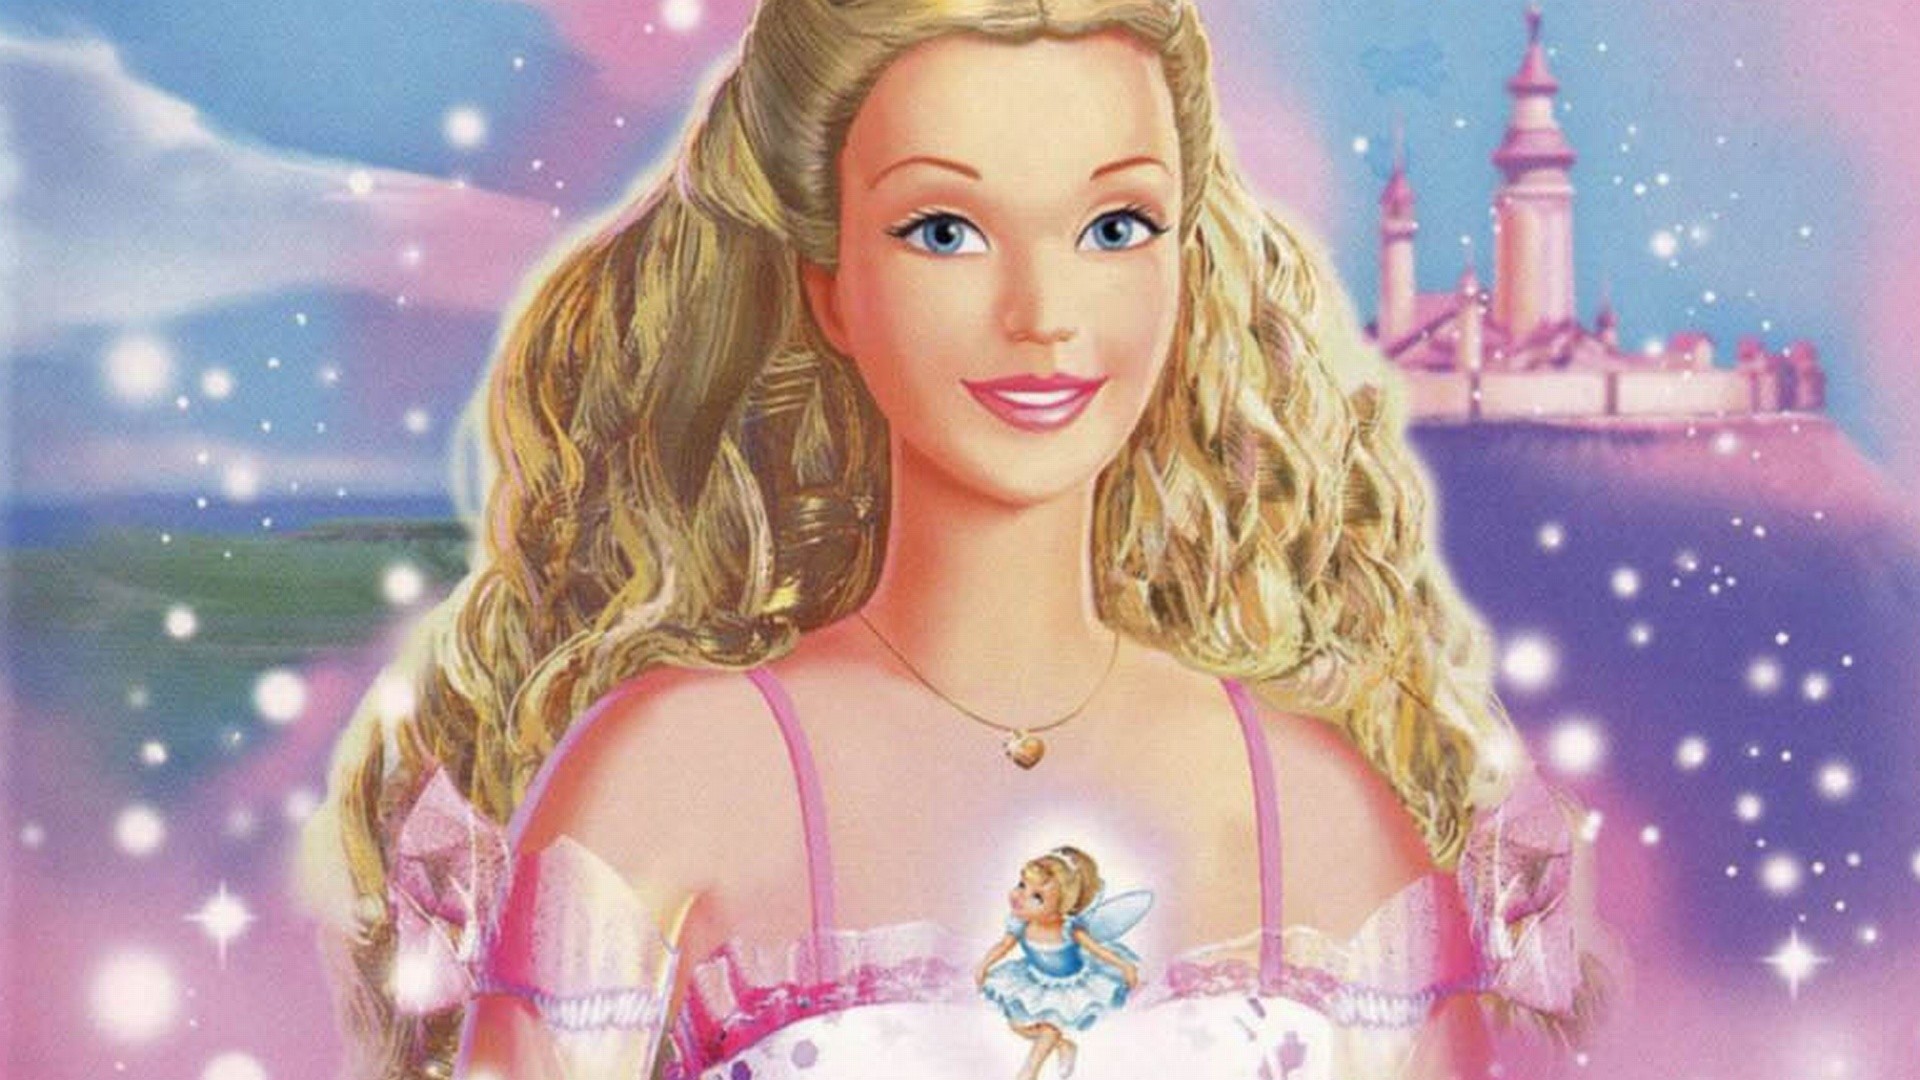 1920x1080 Jessowey's Fave Barbie And Disney Picks images Barbie In The Nut Cracker HD  wallpaper and background photos